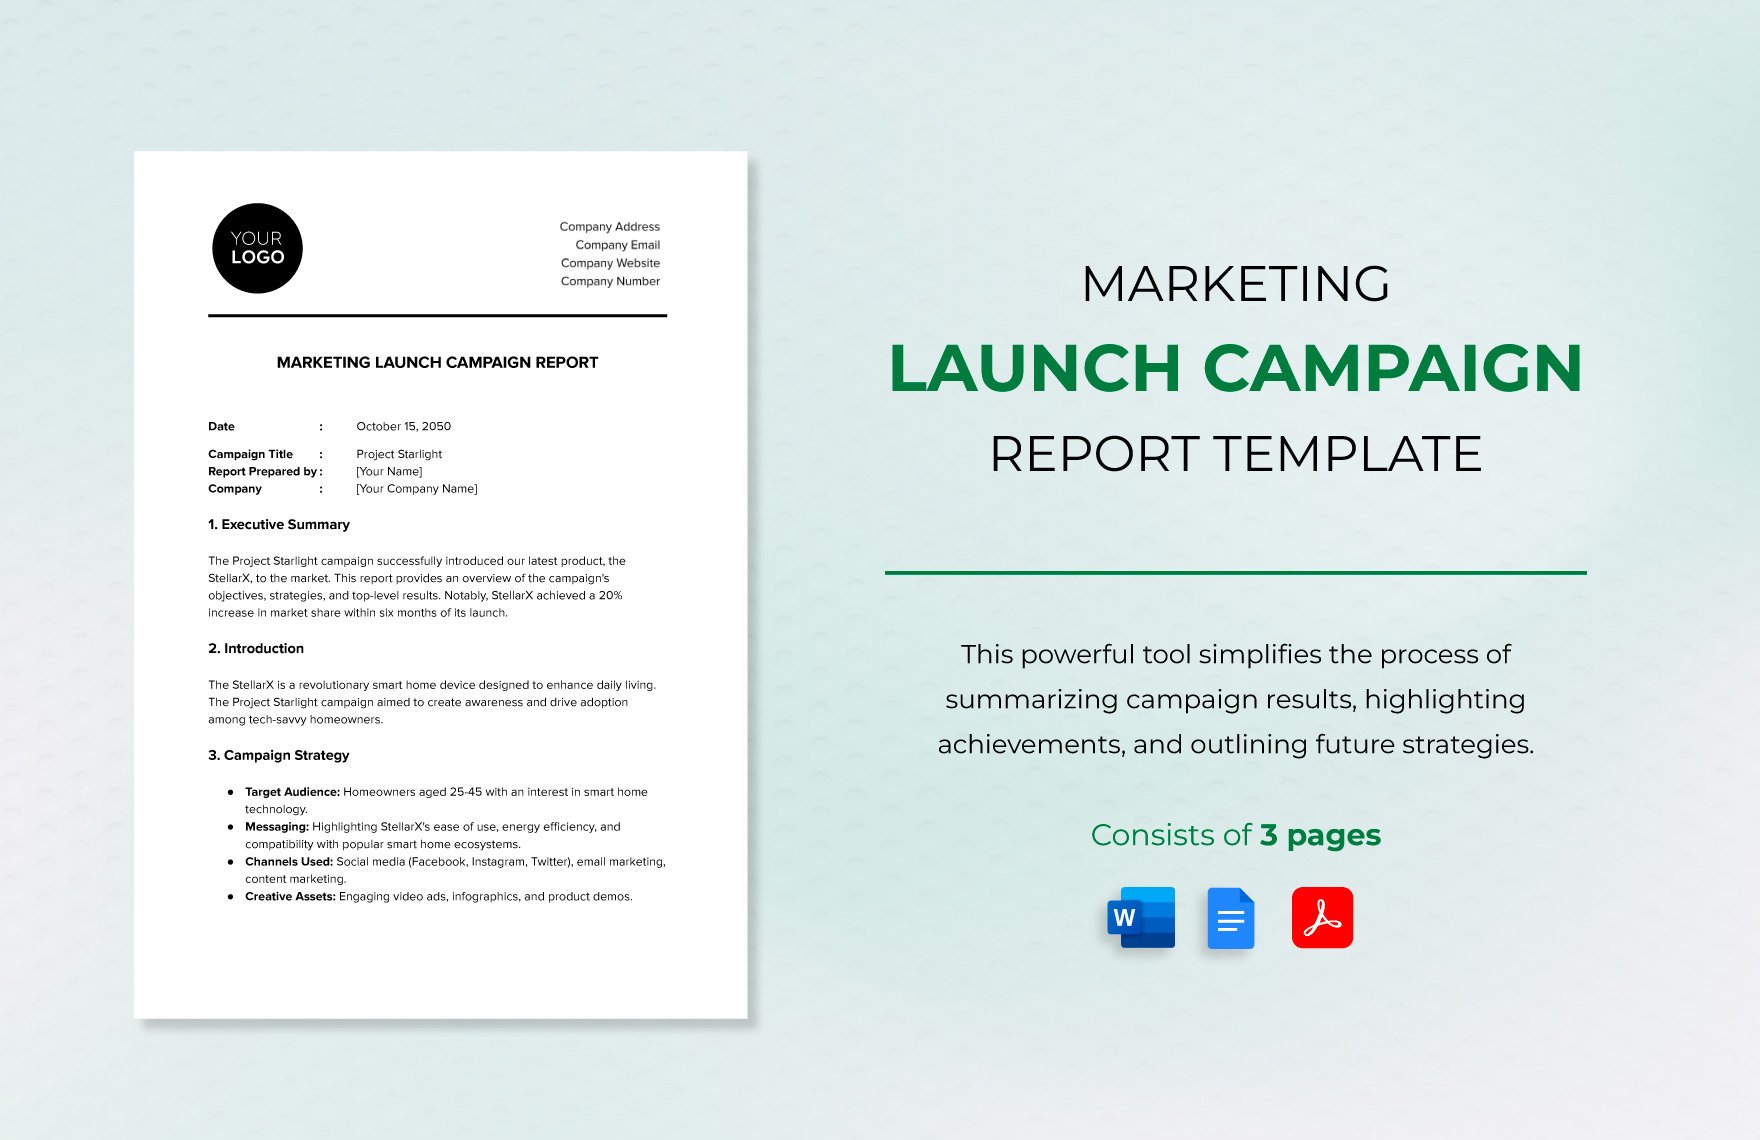 Marketing Launch Campaign Report Template in Word, Google Docs, PDF